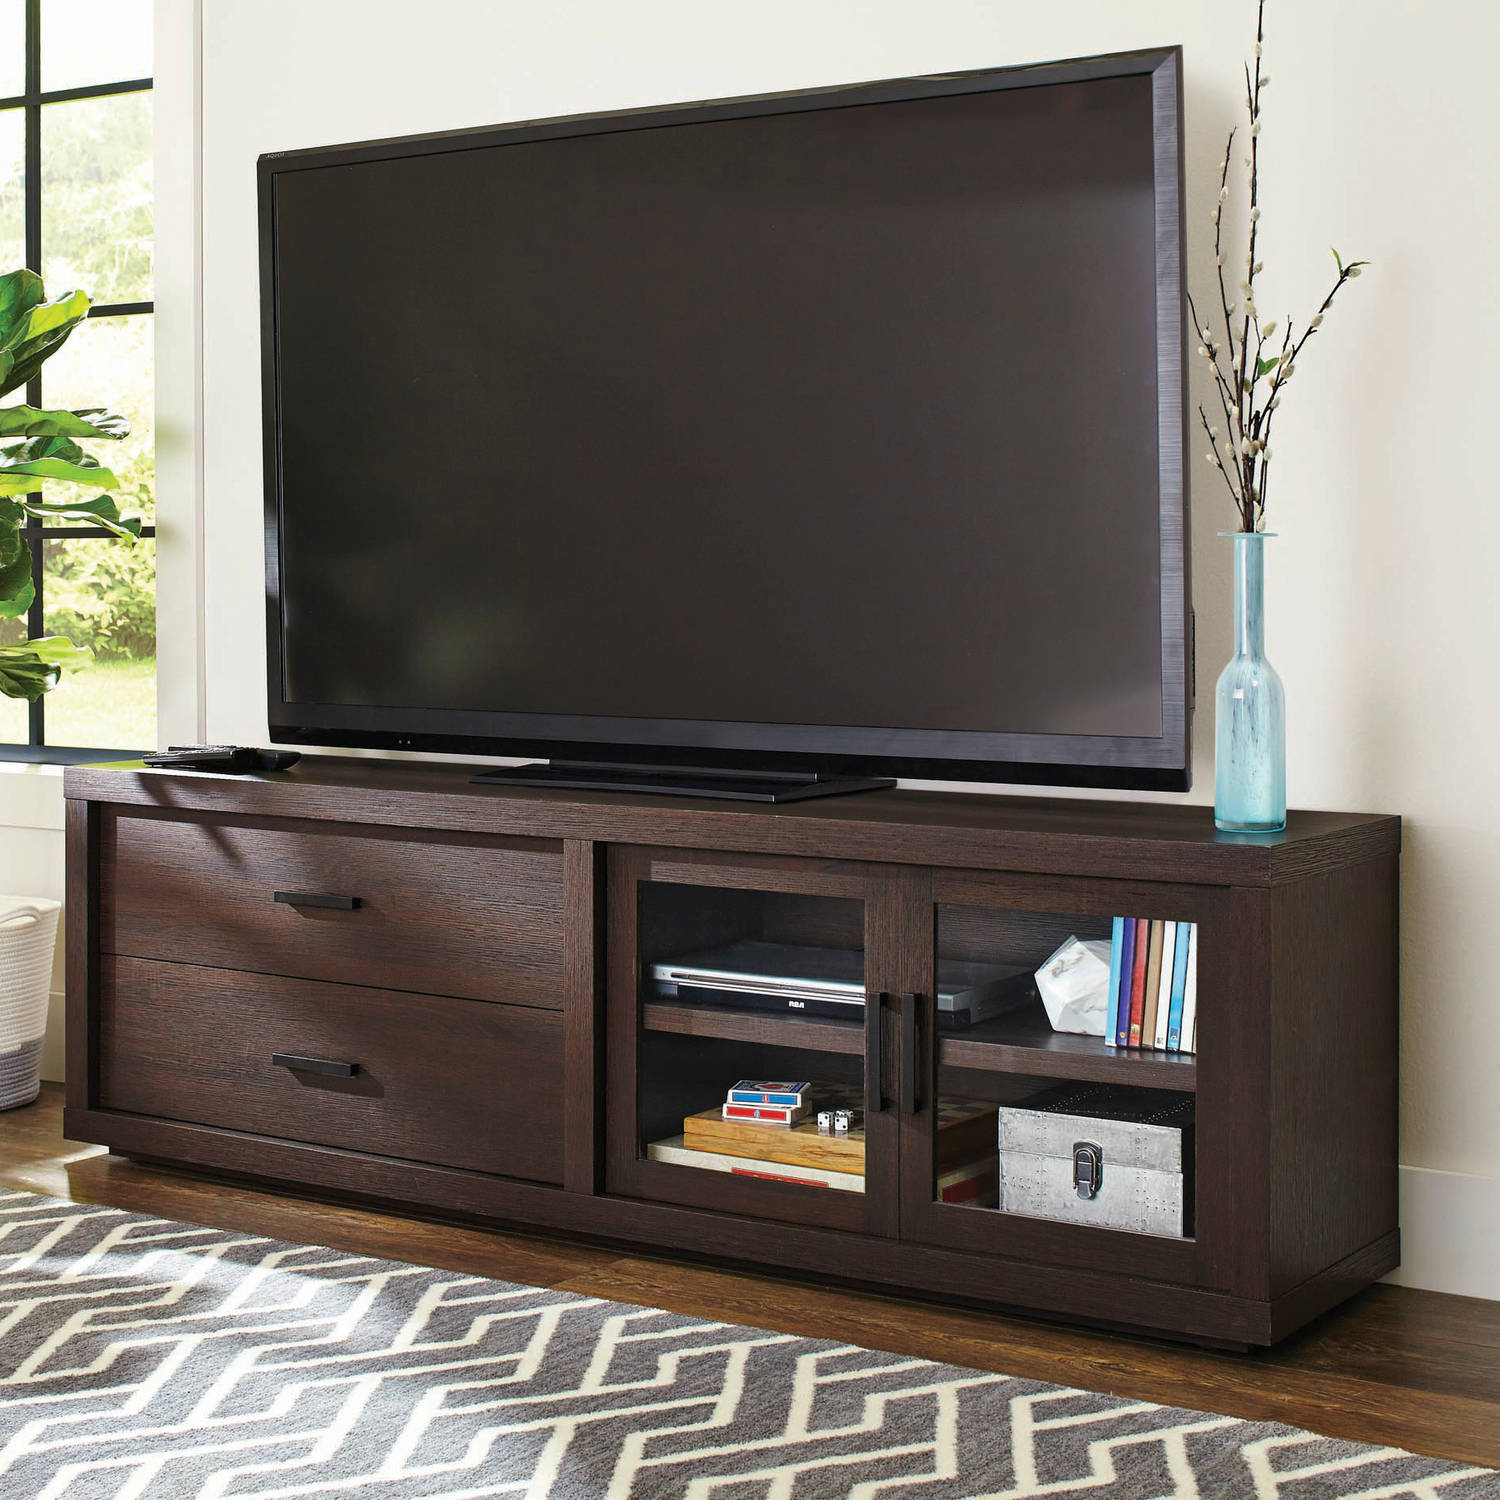 Better Homes & Gardens Steele TV Stand for TV's up to 80", Espresso - image 1 of 11